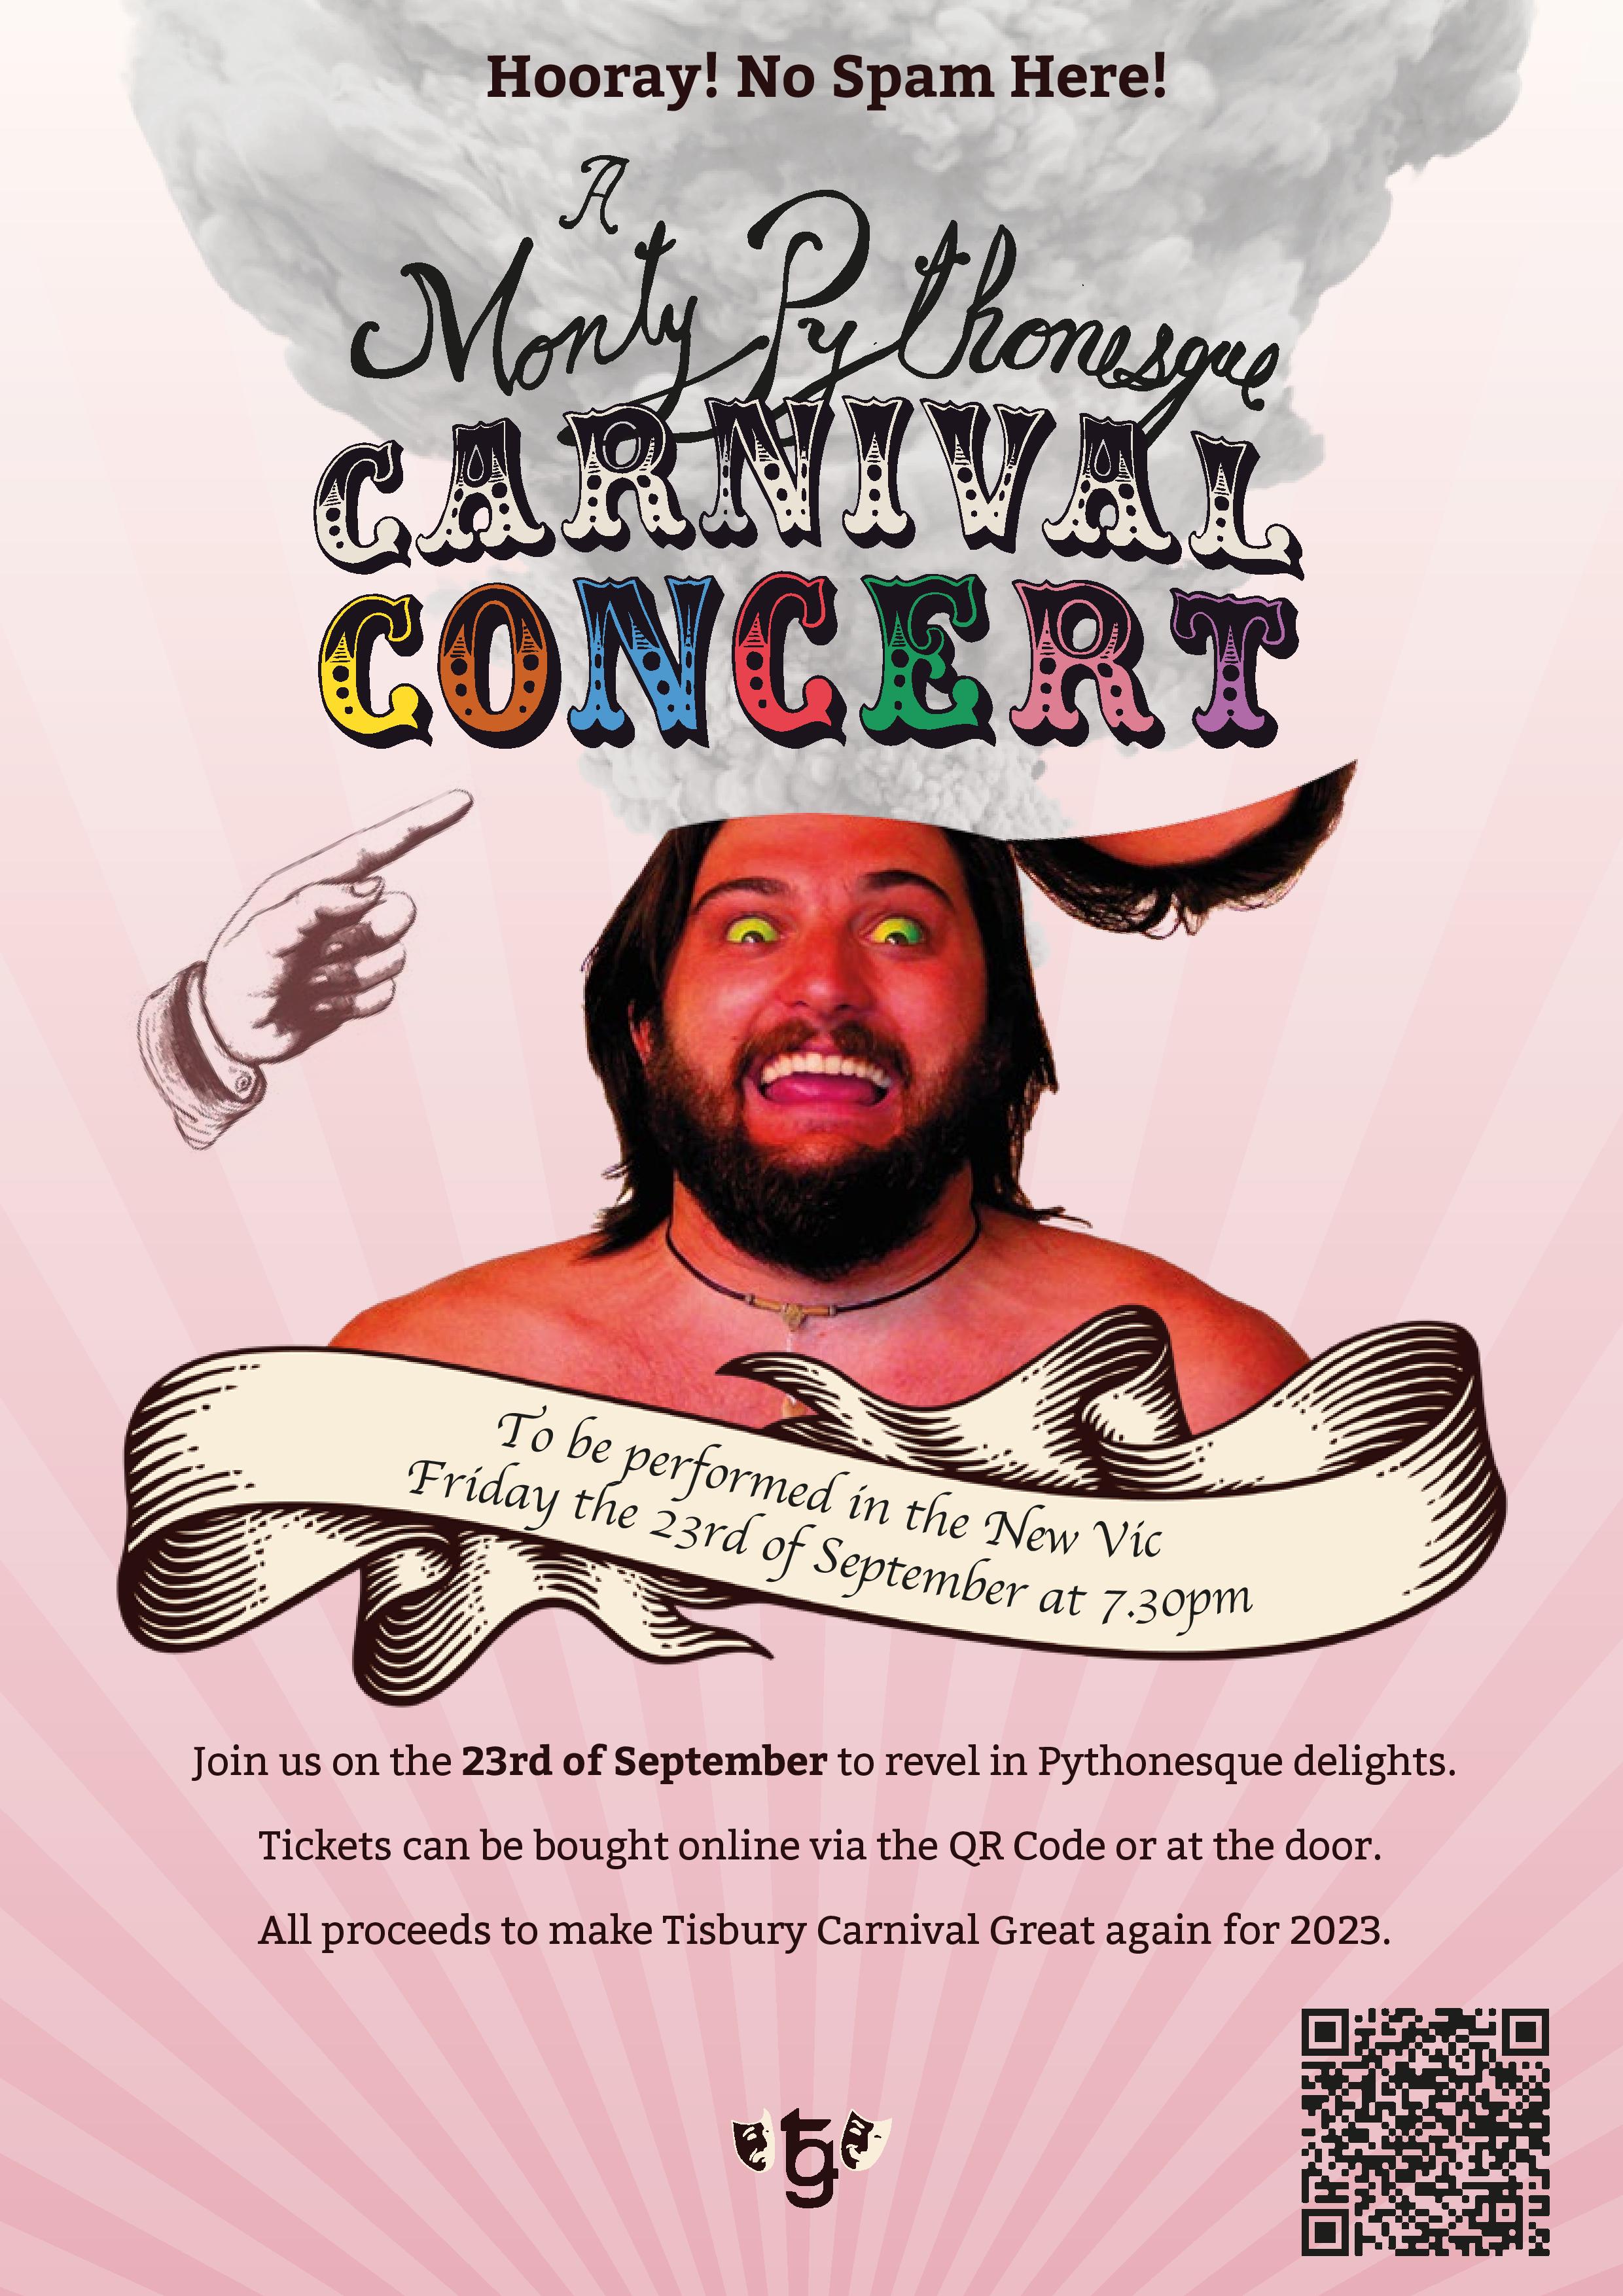 Montypythonesque Carnival Concert on Friday 23rd September at the New Vic at 7.30 pm.  Tickets can be bought online using the QR Code or on the Door.